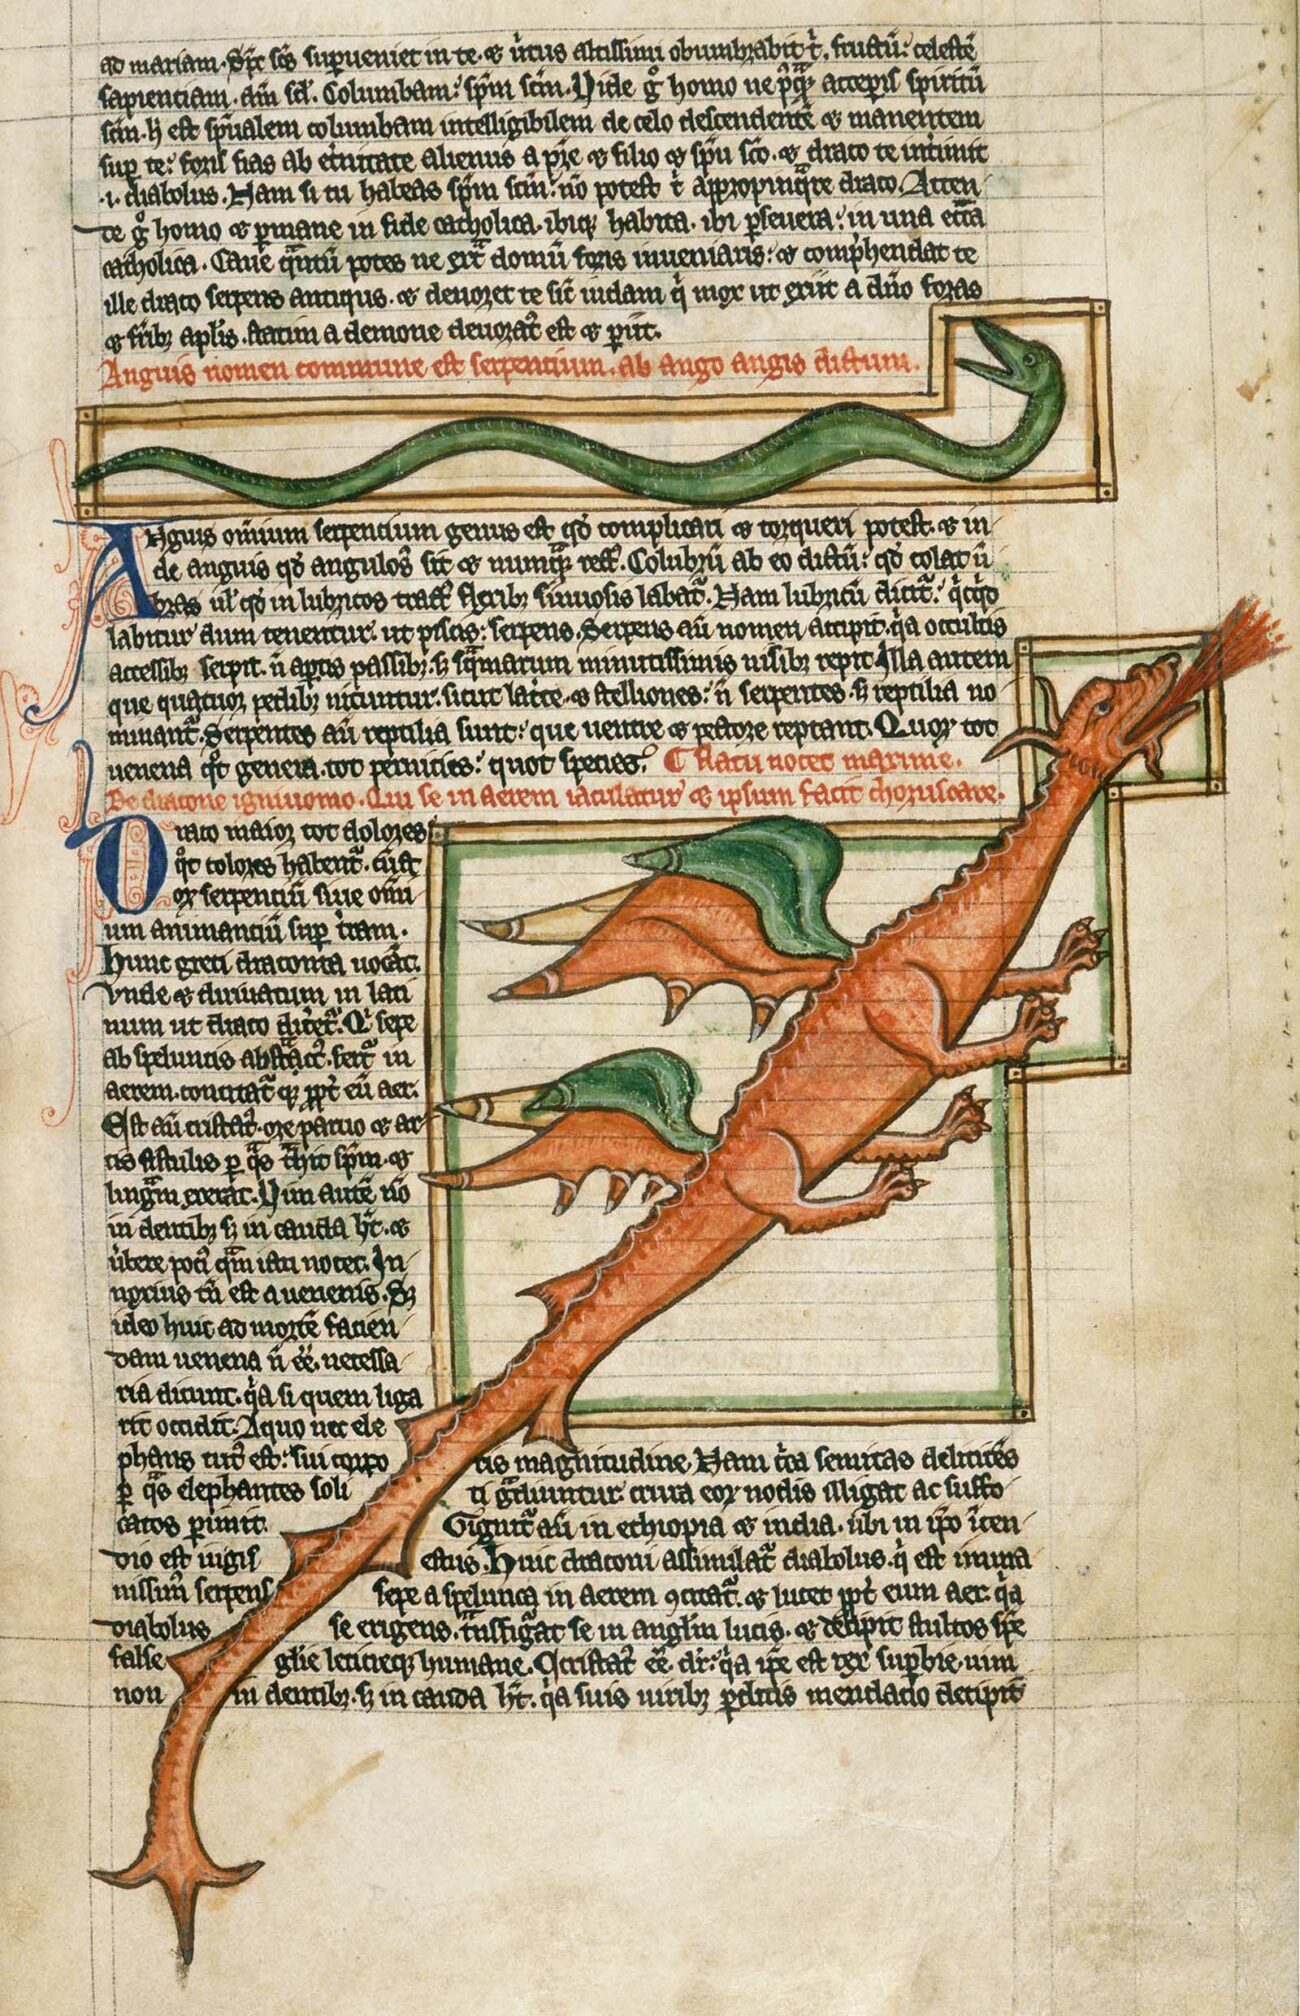 Dragon in a bestiary, about 1240–50, unknown illuminator, made in England, parchment, 11 × 6 1/2 inches (The British Library, London, Harley Ms. 3244, fol. 59.)